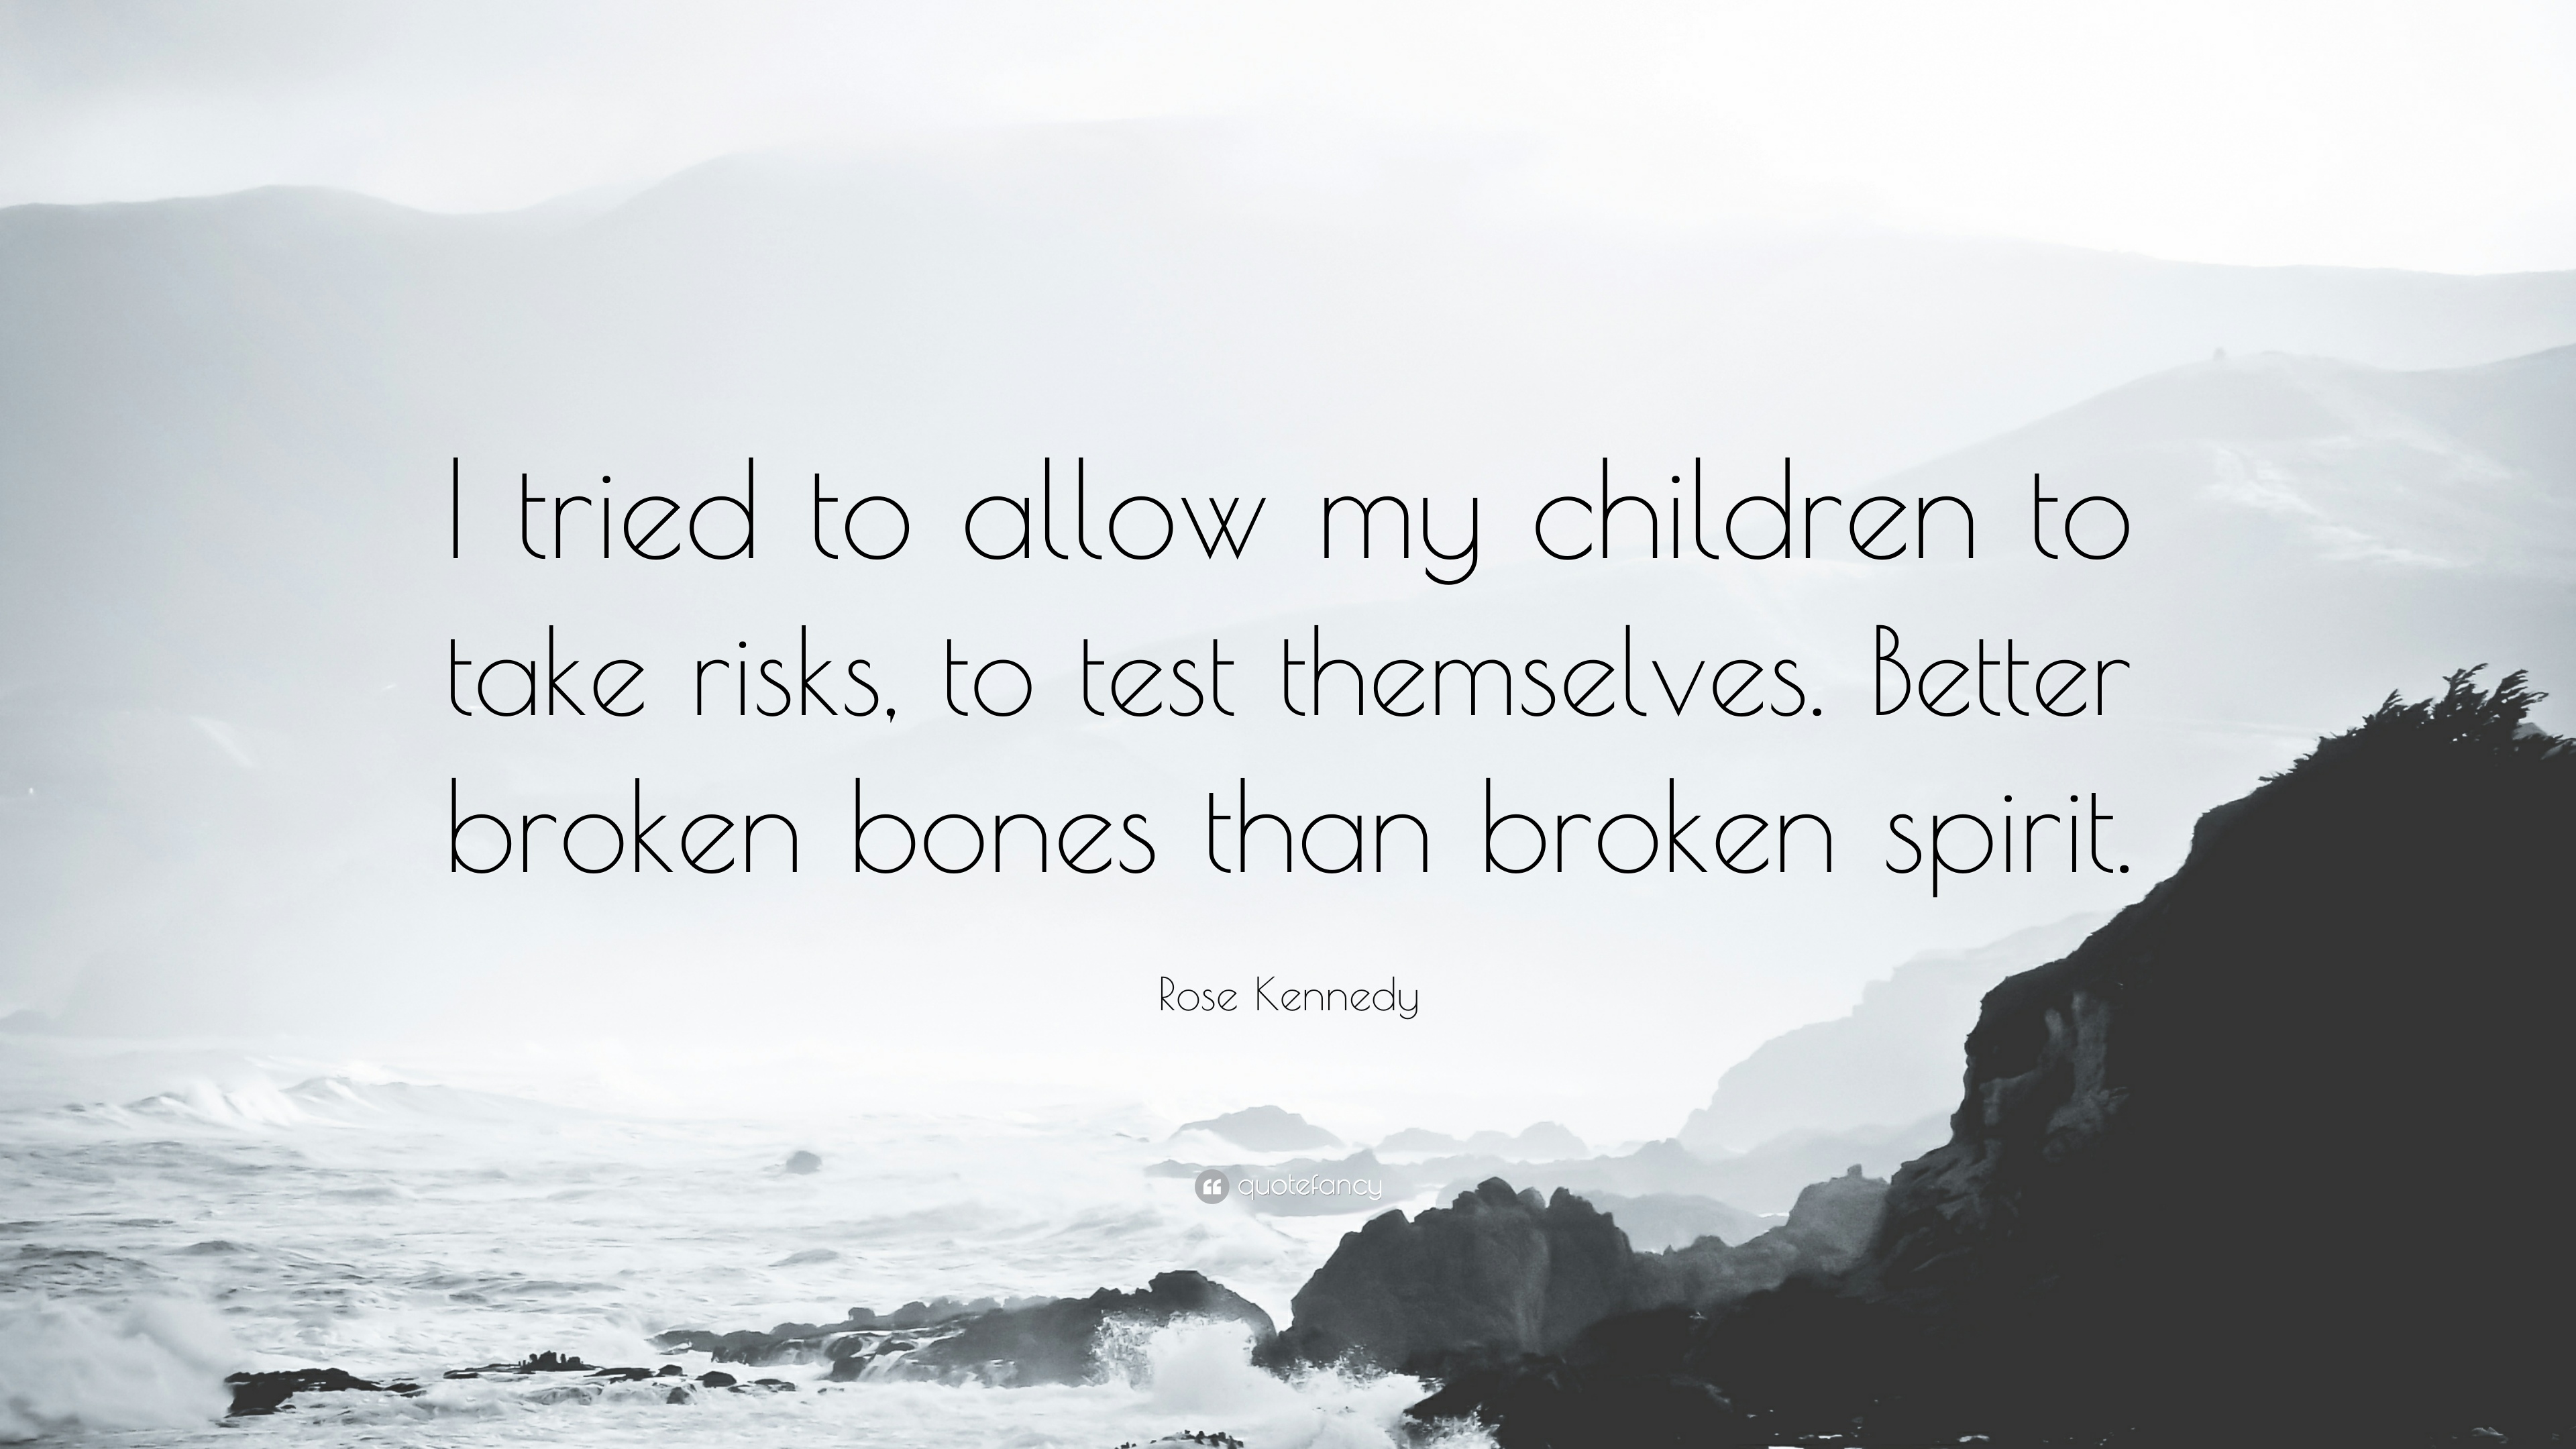 Rose Kennedy Quote: “I tried to allow my children to take risks, to test themselves. Better